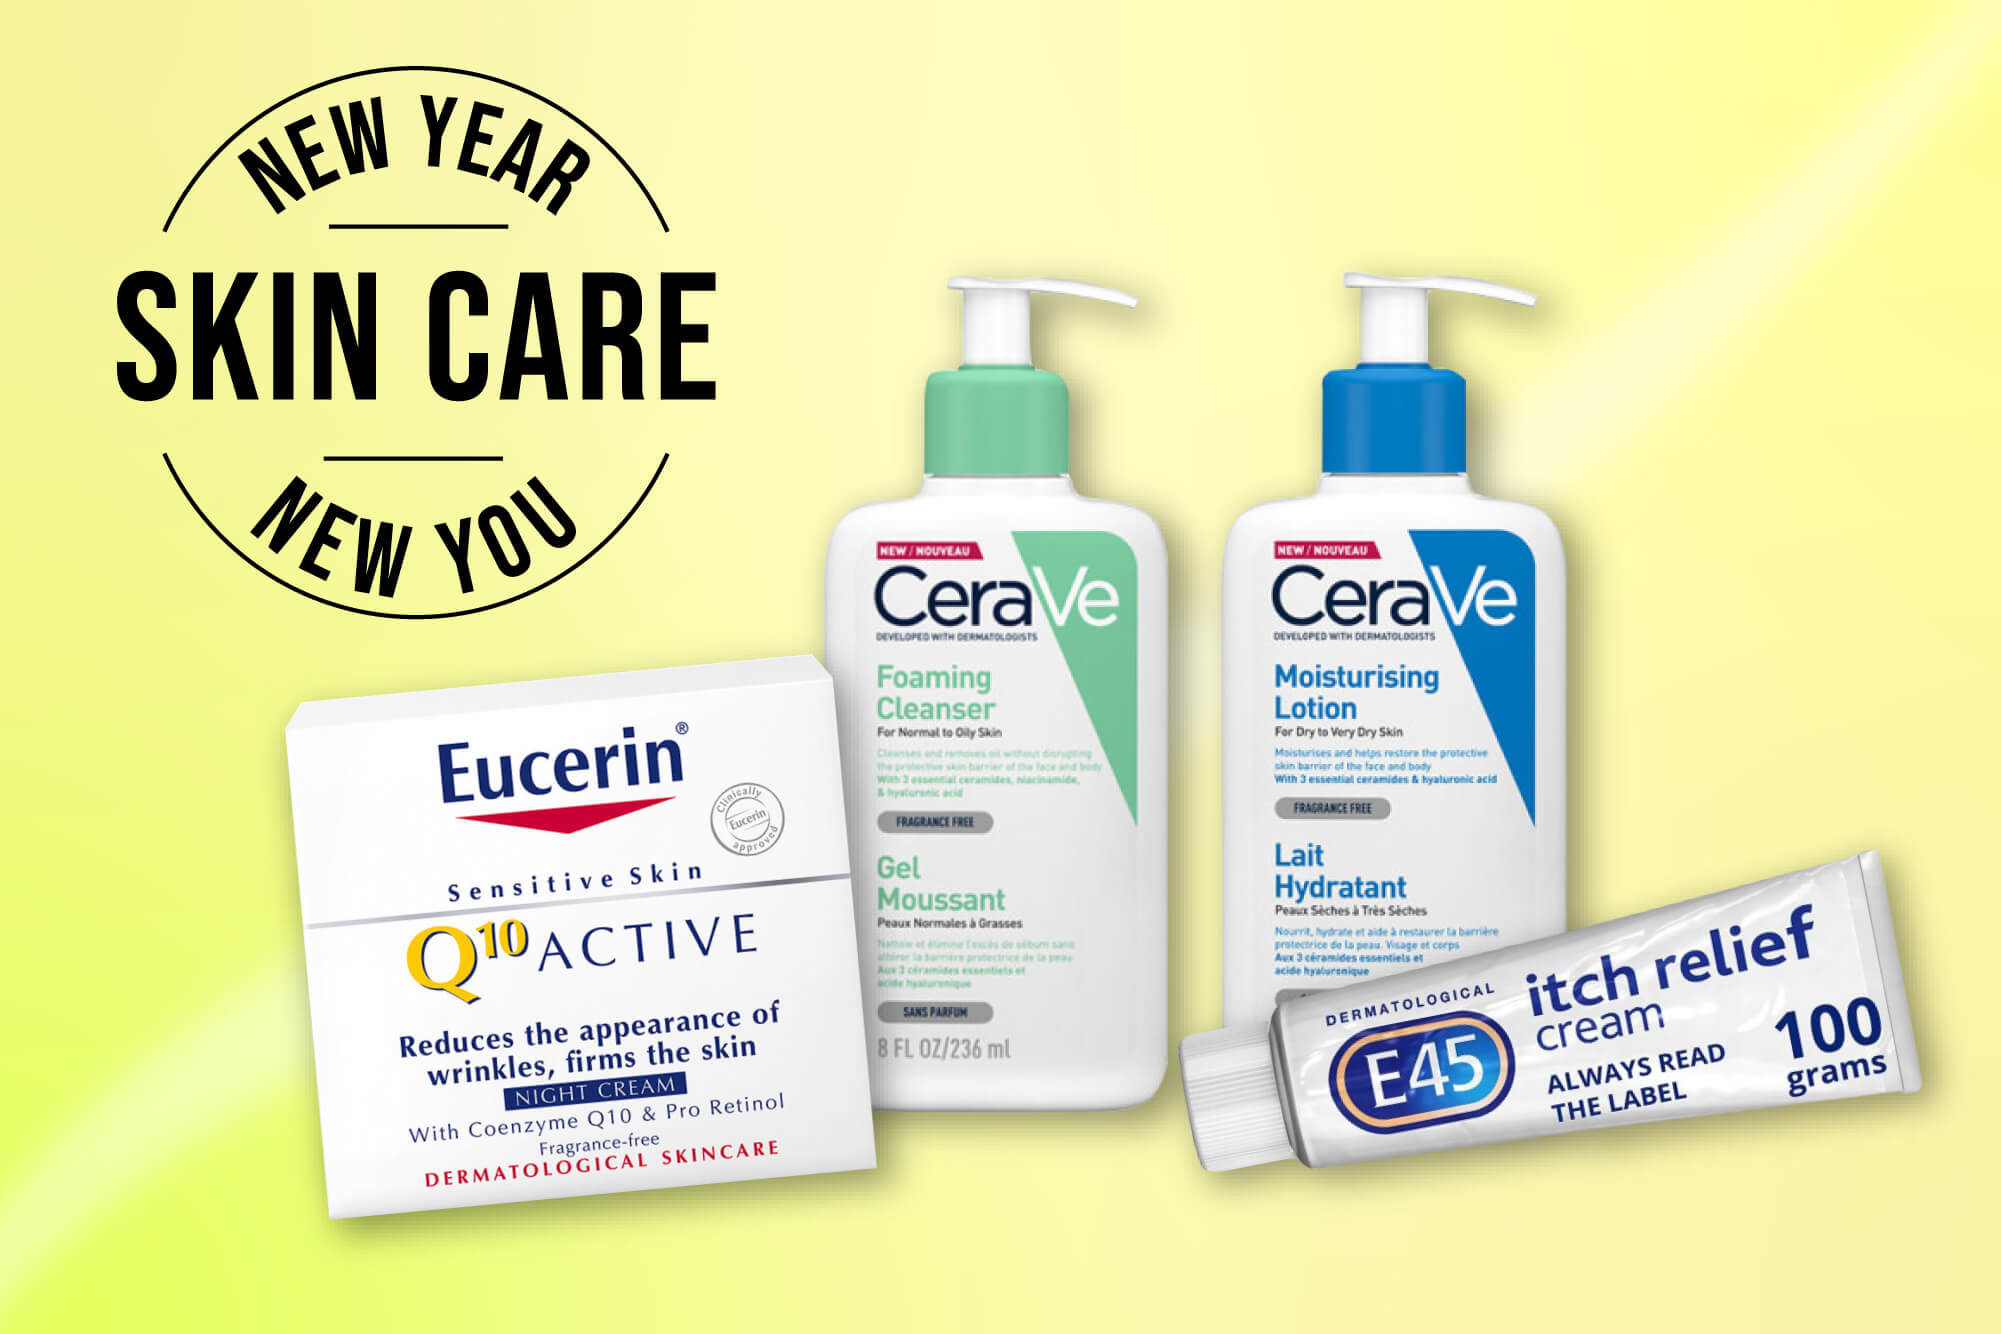 New Year, New you - Skin care	